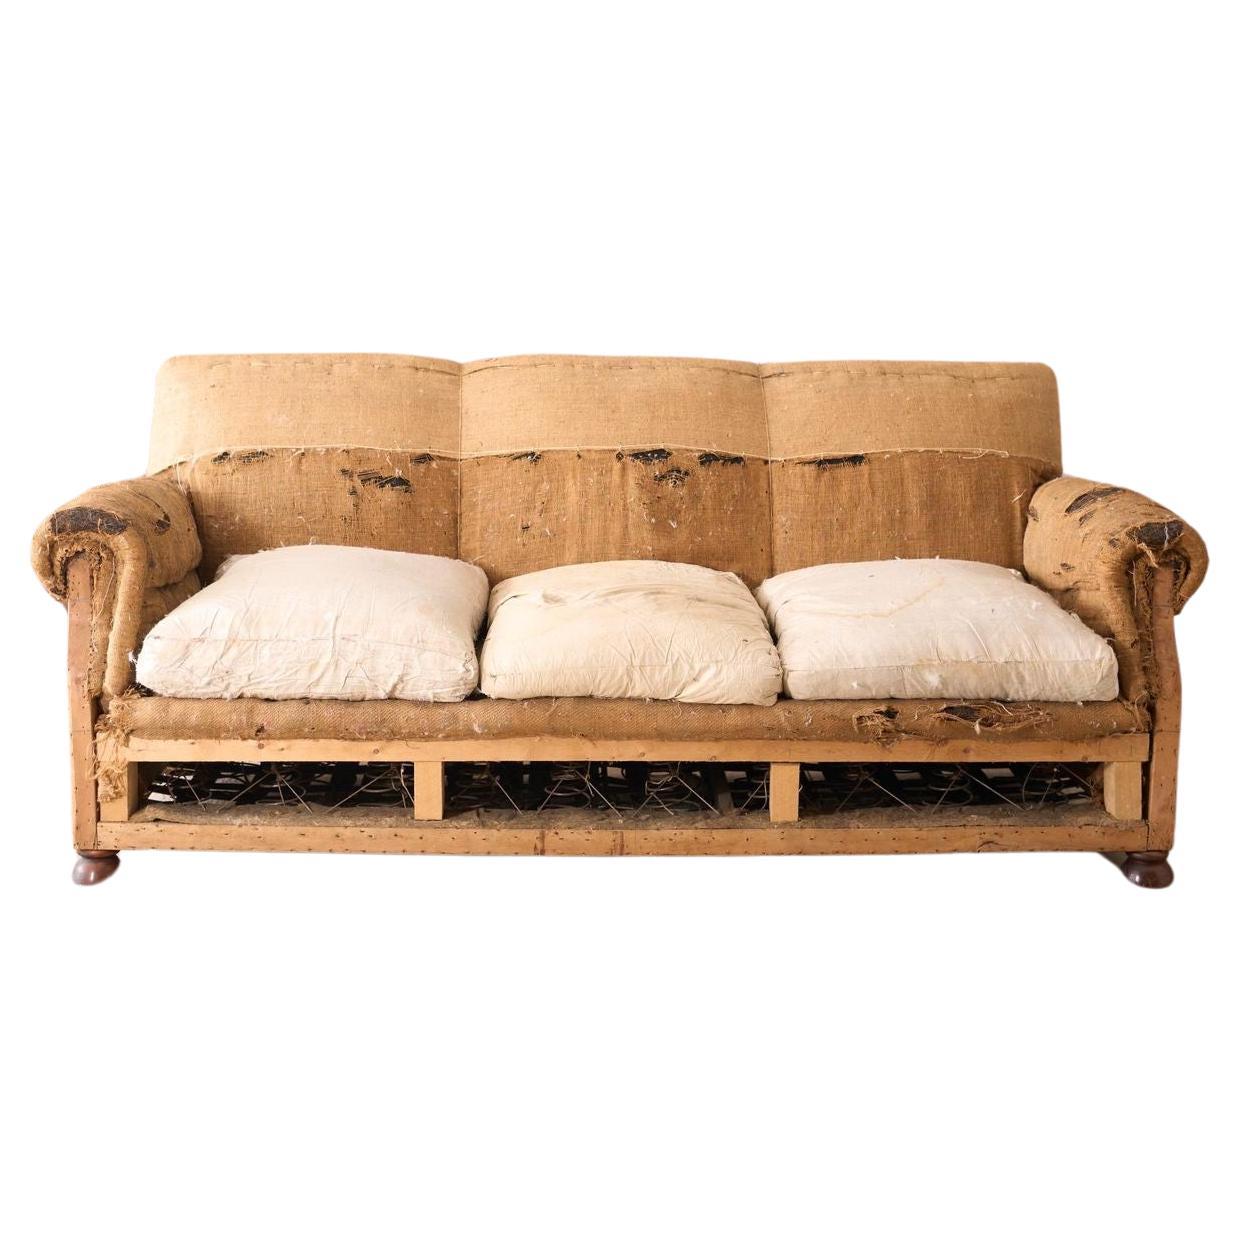 Early 20th century square back country house sofa For Sale